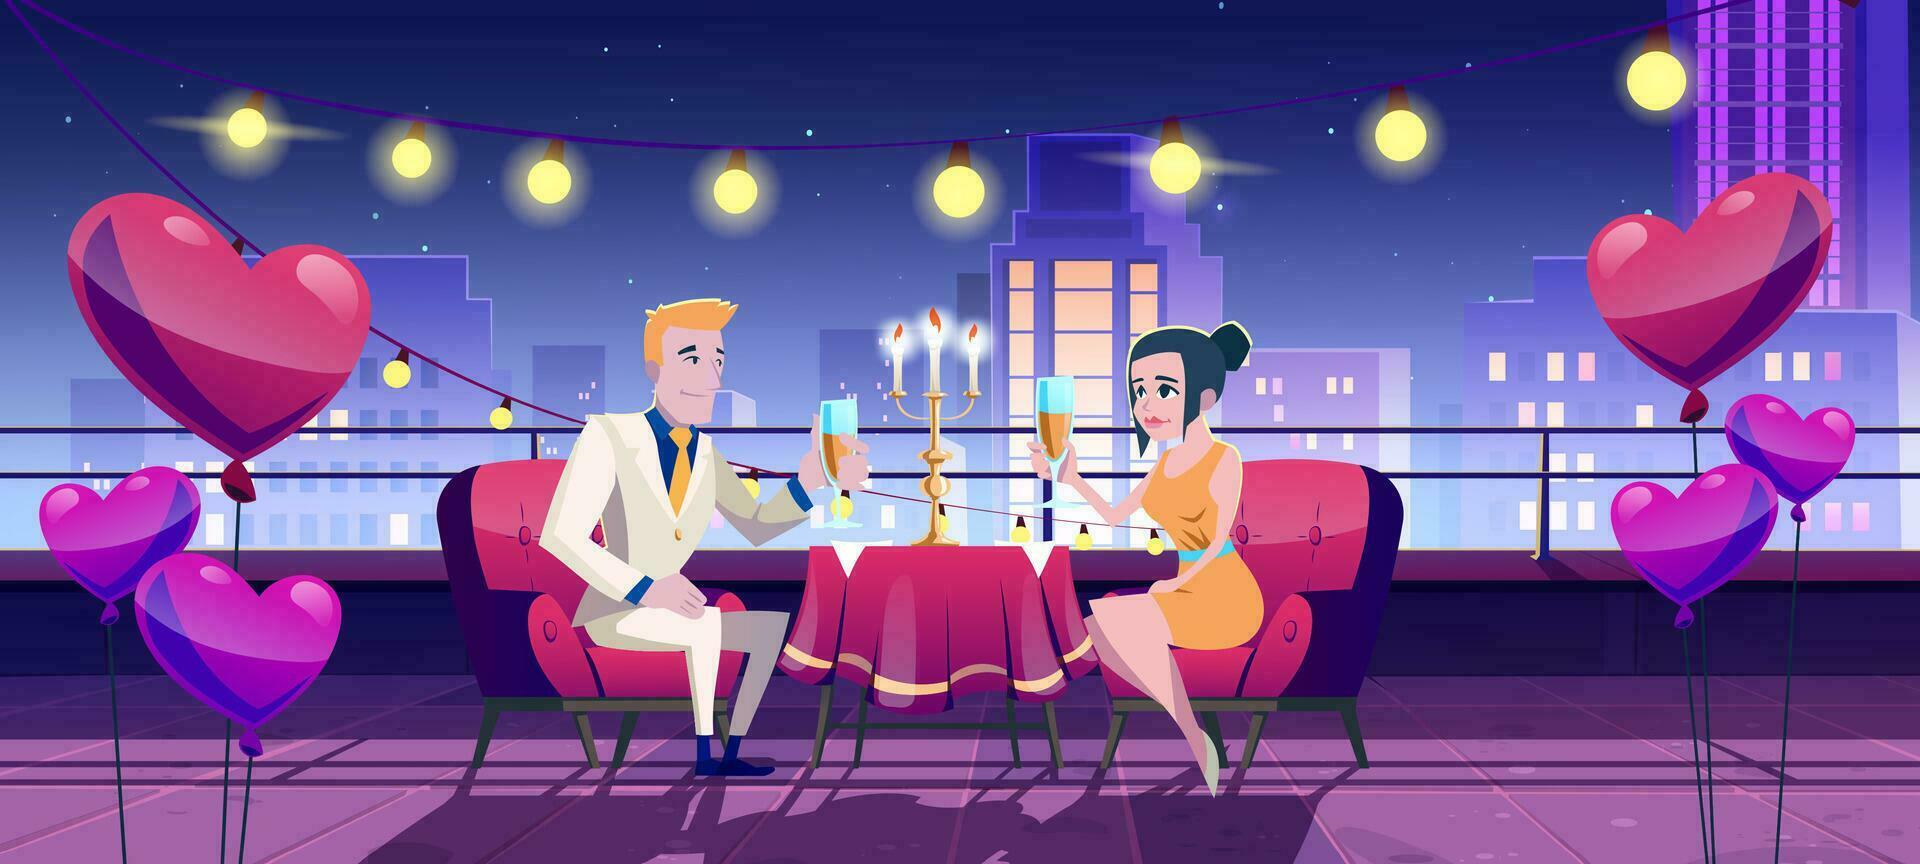 Romantic dinner date at night on city terrace vector